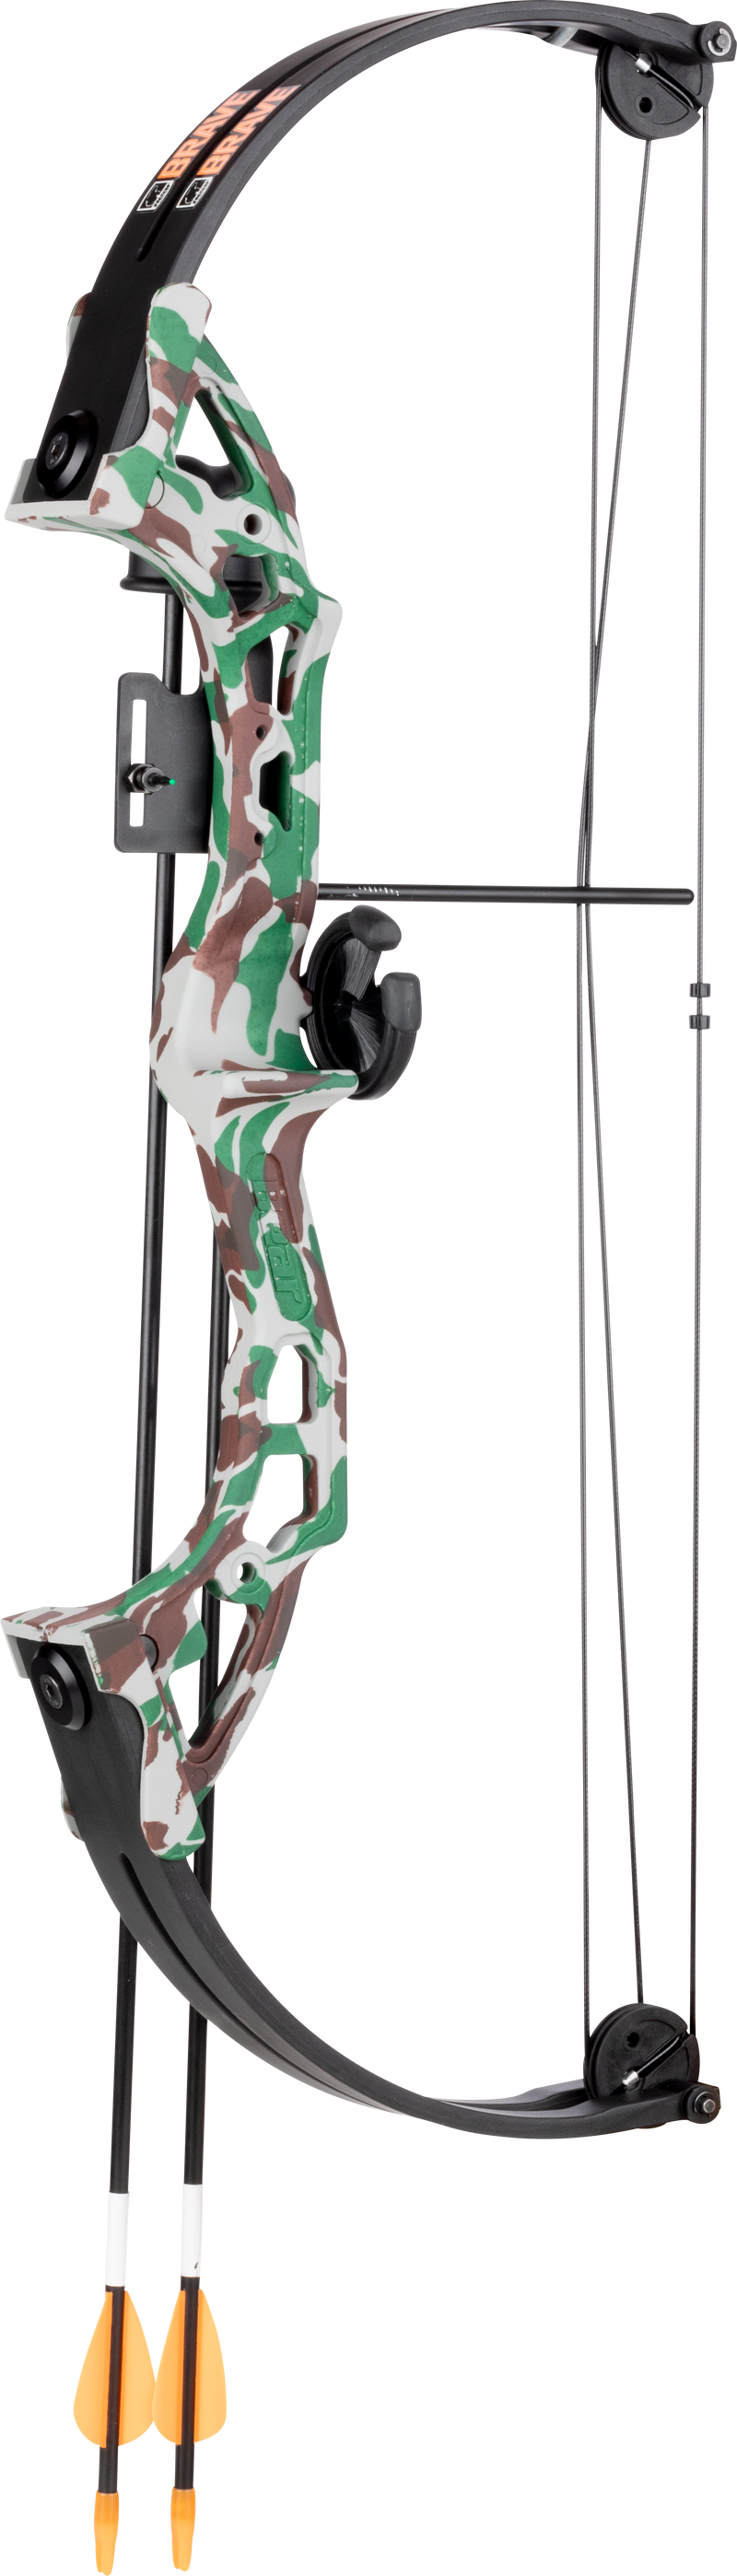 Bear Brave Bow with Biscuit - Camo Youth Compound Bow - Youth_1